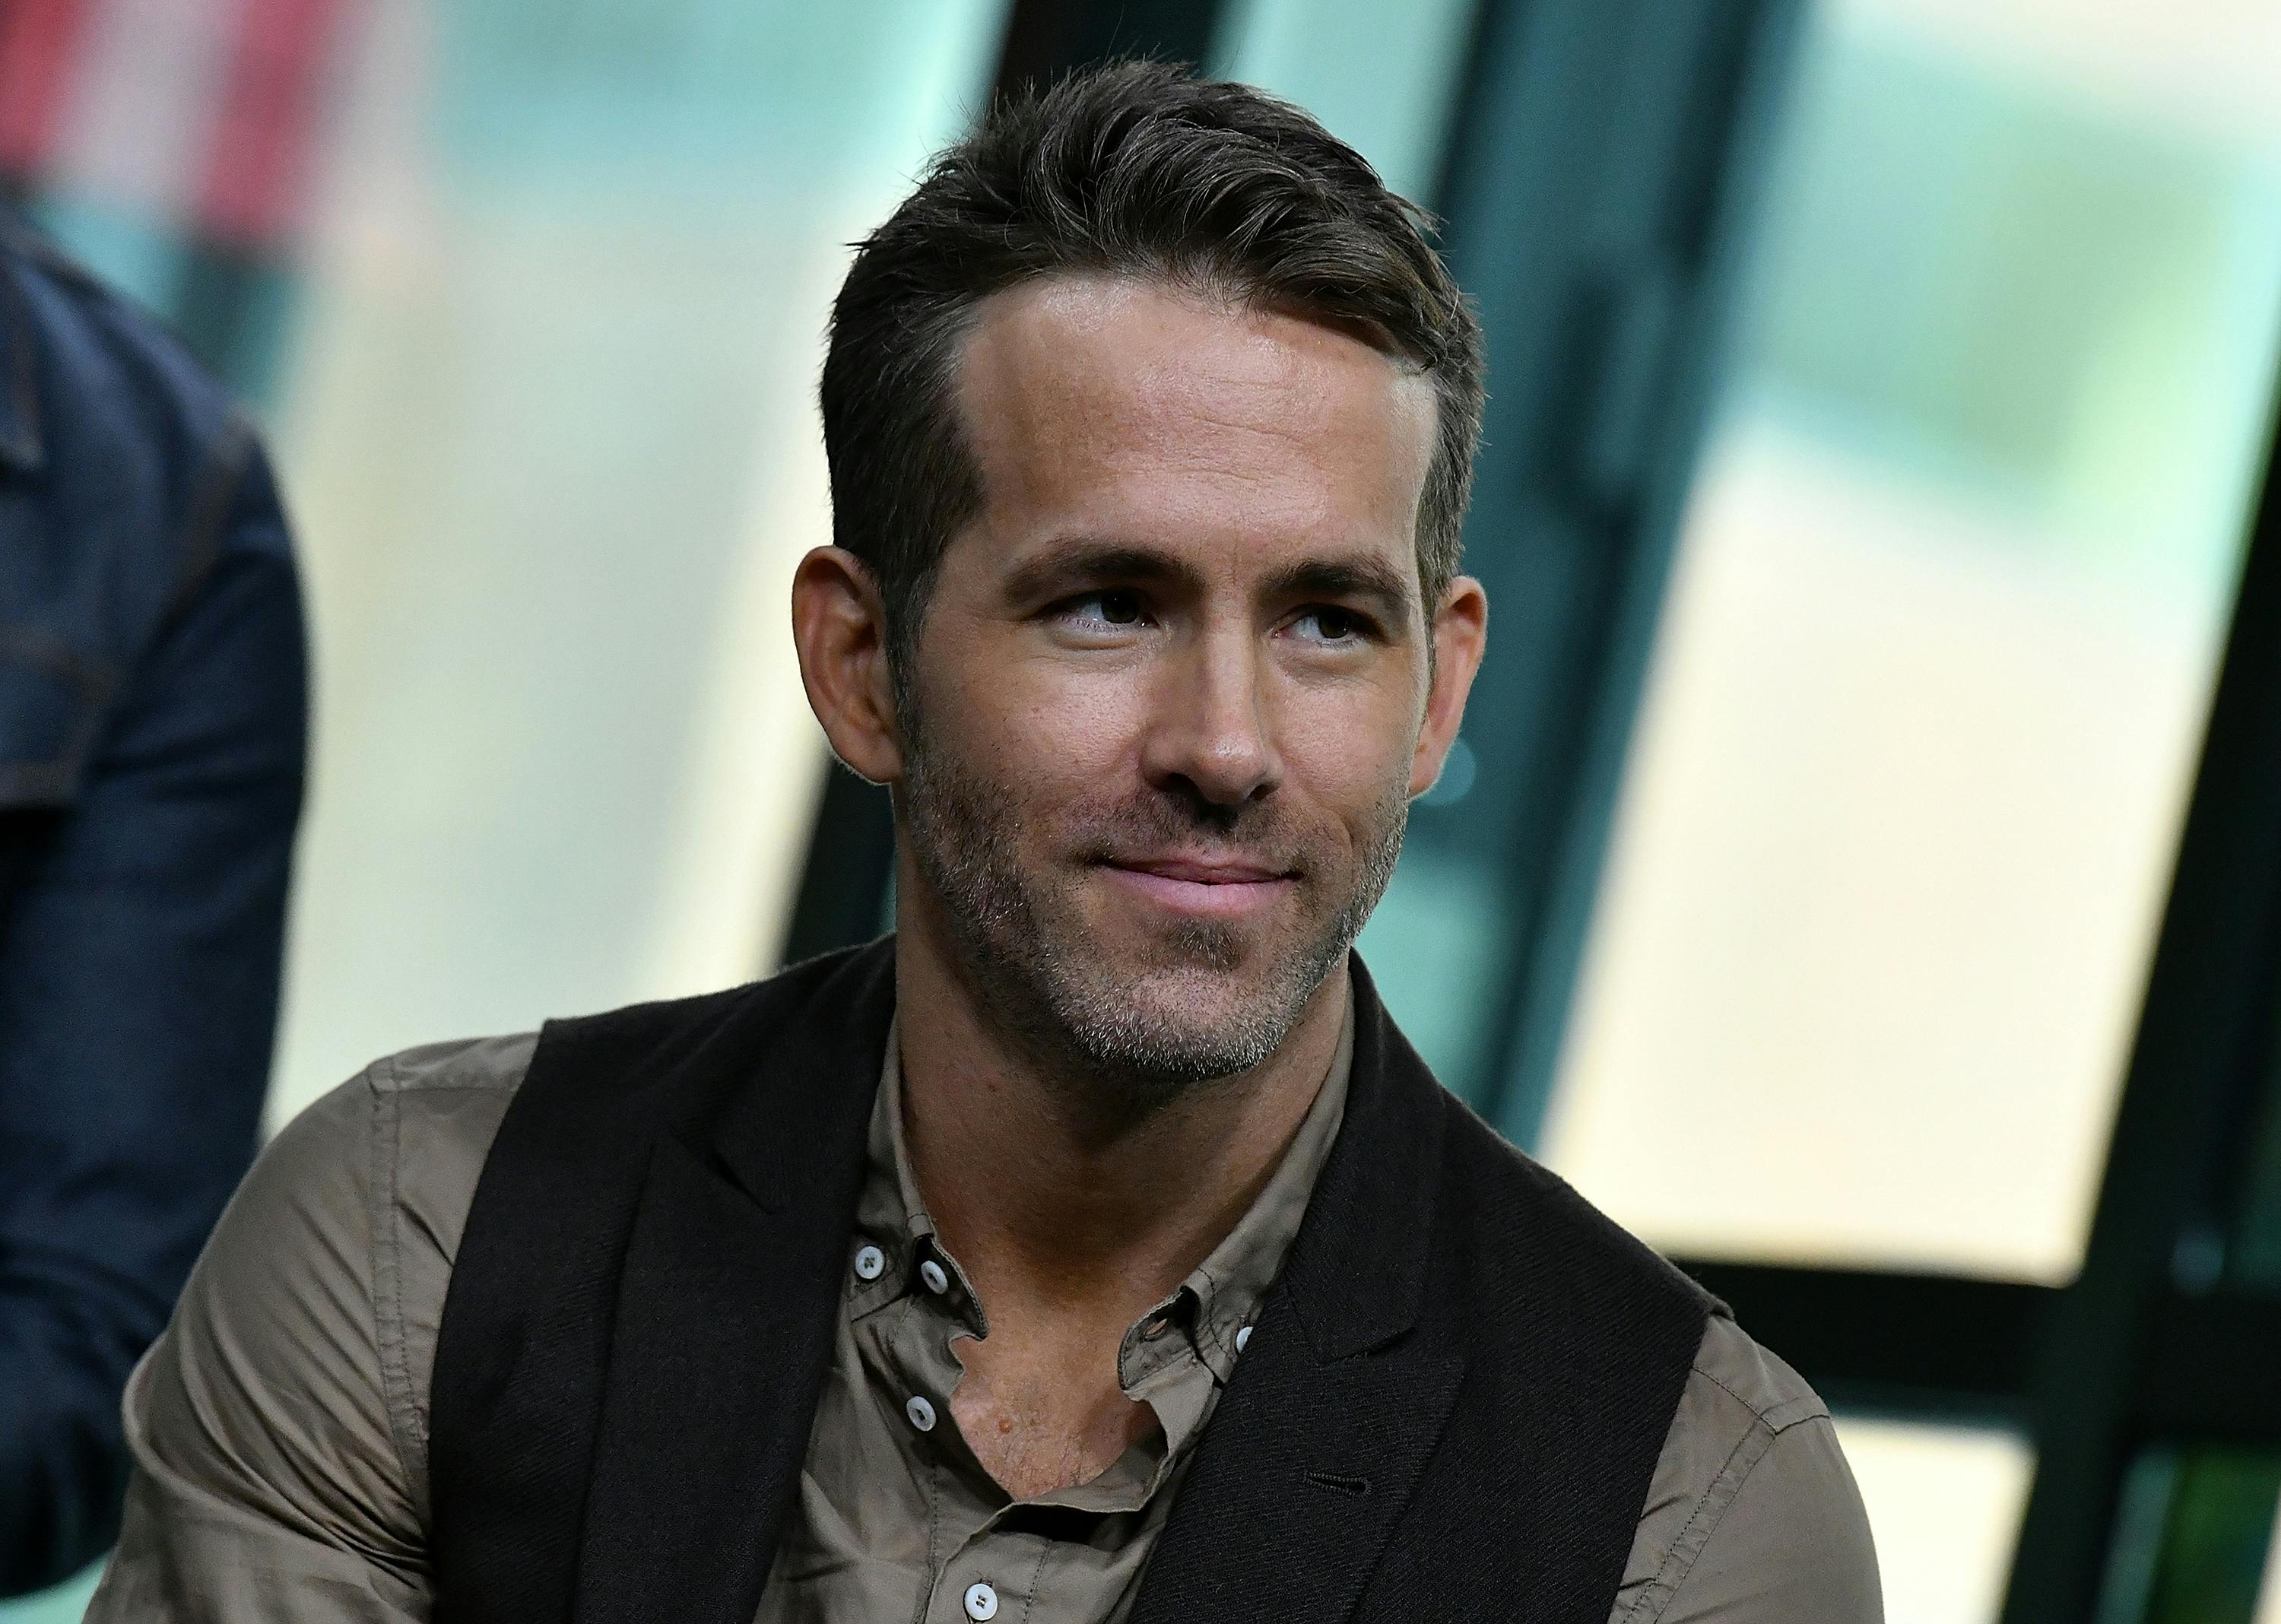 Have You Ever Seen Home Alone on Weed0 Stoned Alone: Ryan Reynolds to Star in Home Alone Remake